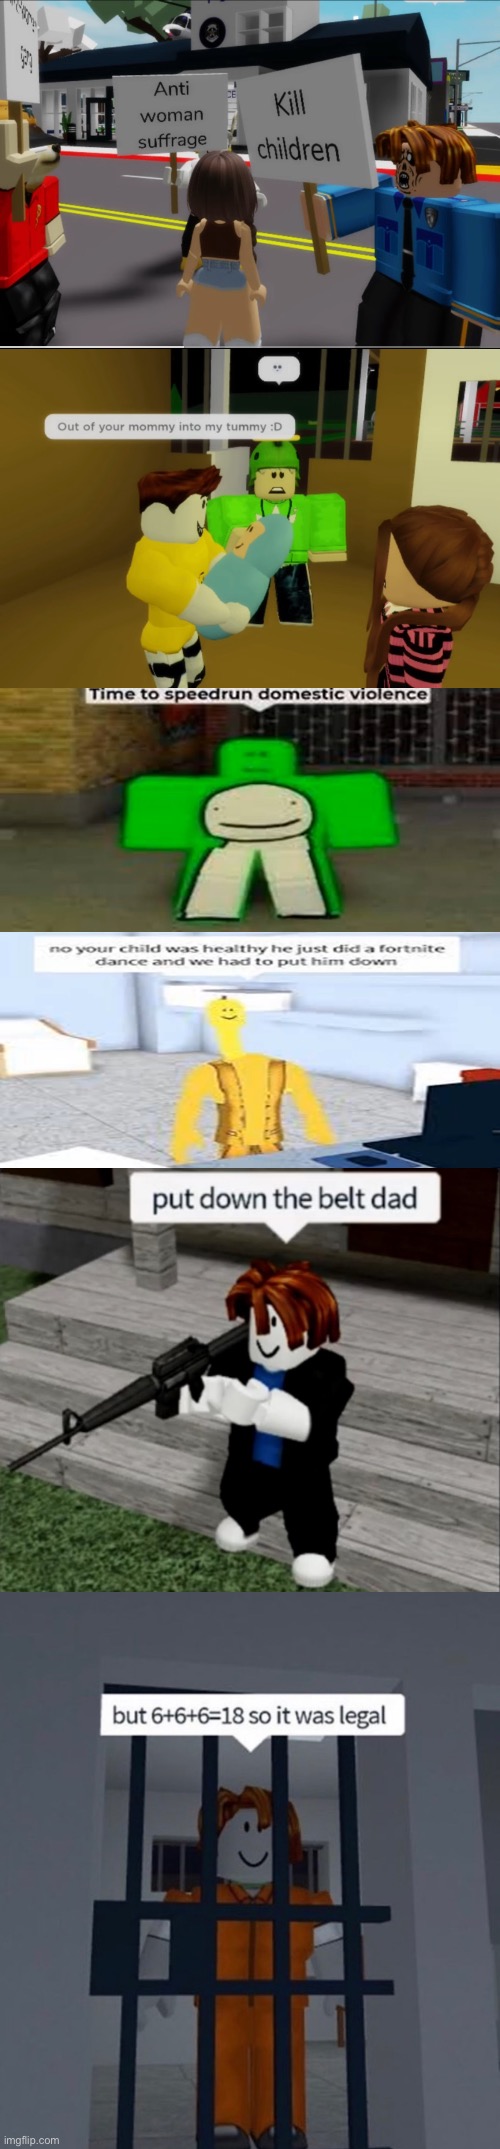 Cursed Roblox images | image tagged in roblox,cursed image,funny,funny memes,dark humor,memes | made w/ Imgflip meme maker